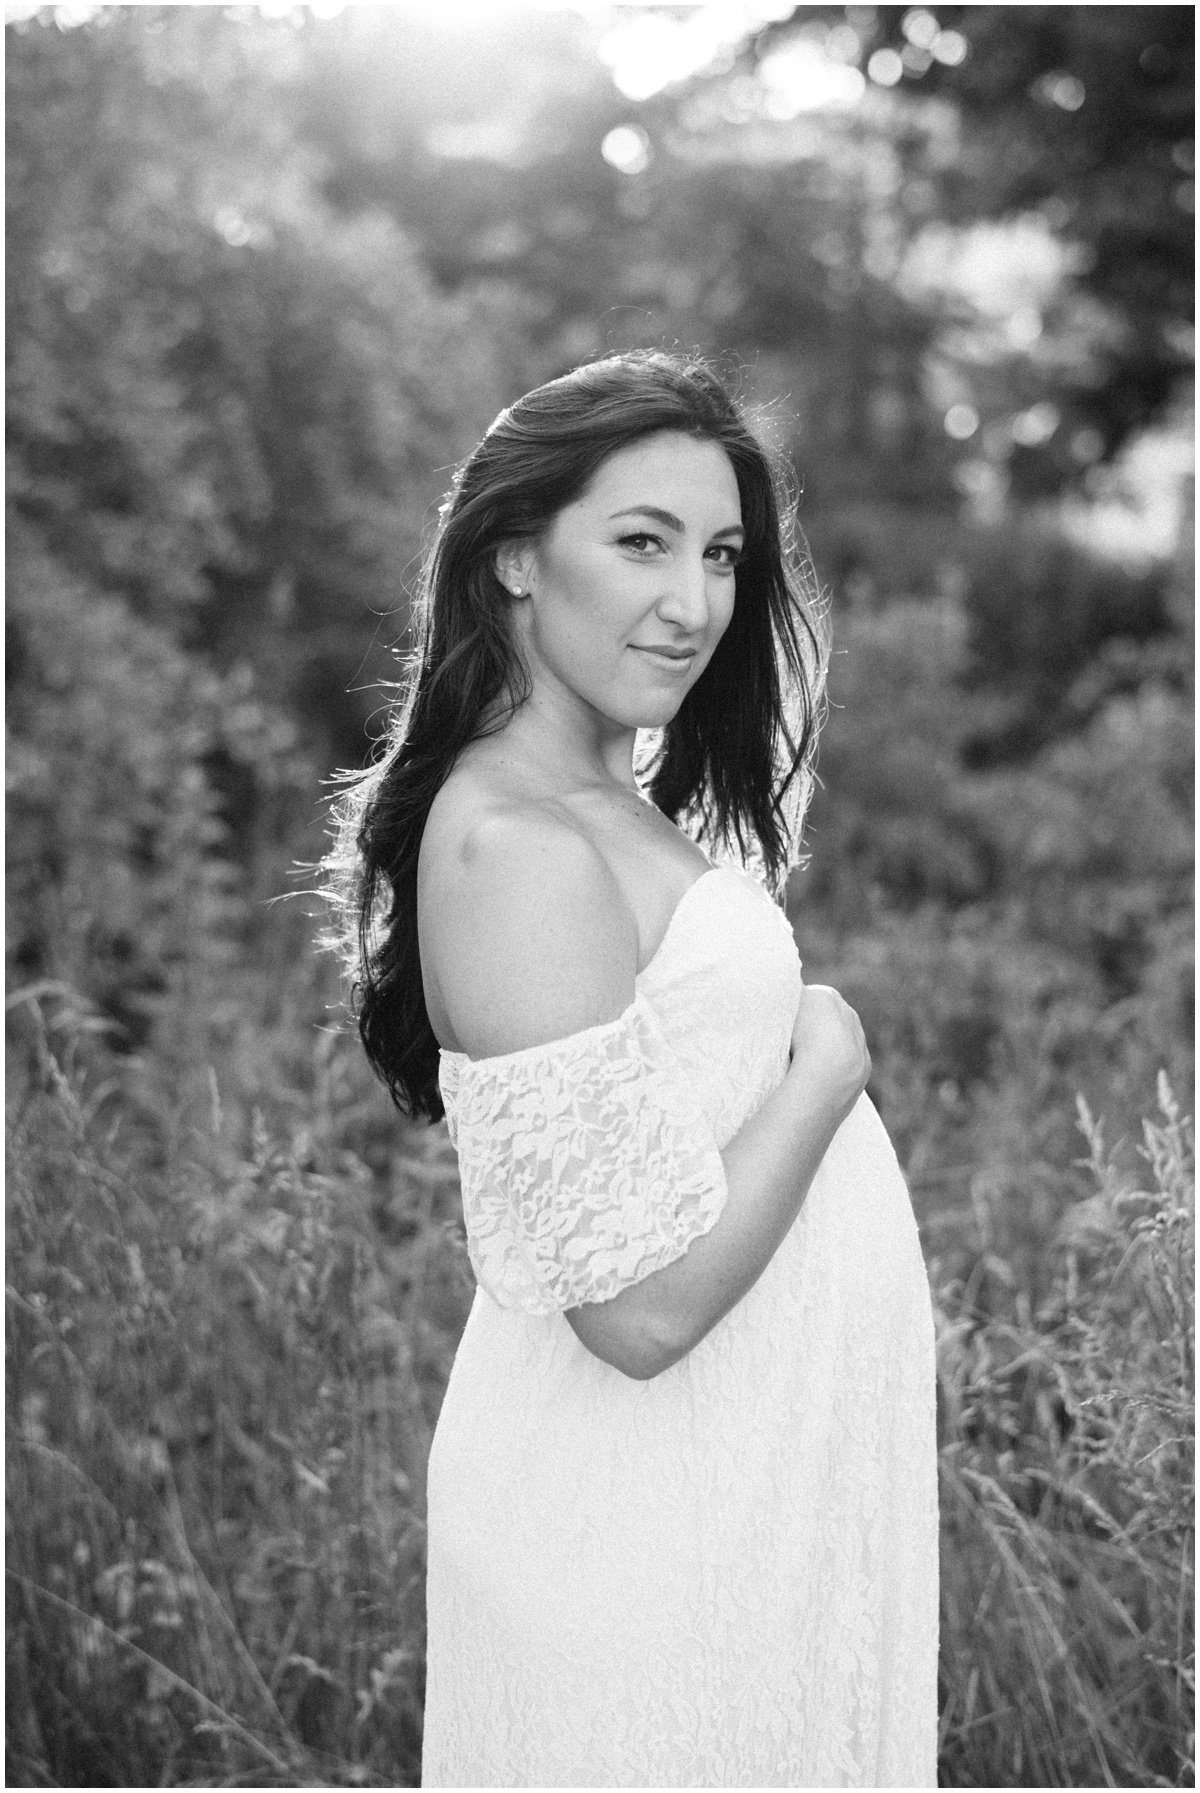 Woman wearing white flowy dress and cradling baby bump during maternity session | NKB Photo | Why maternity photos are important